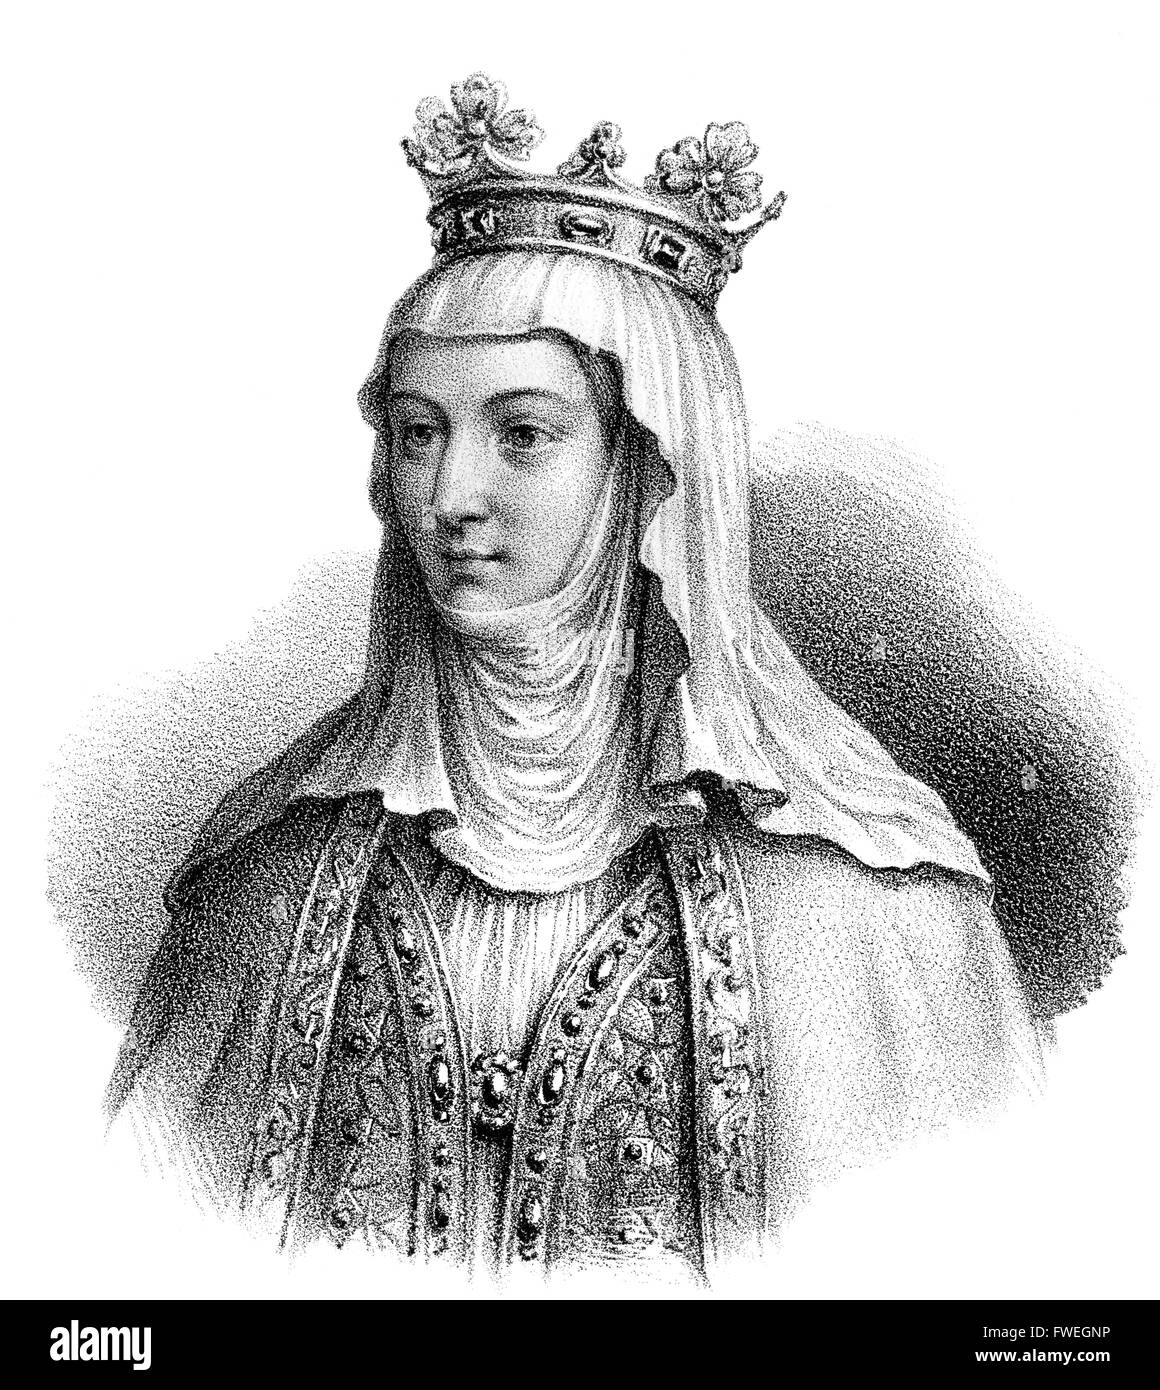 Clementia of Hungary, Clémence de Hongrie, Klementine von Ungarn, 1293-1328, queen of France and Navarre as the second wife of K Stock Photo